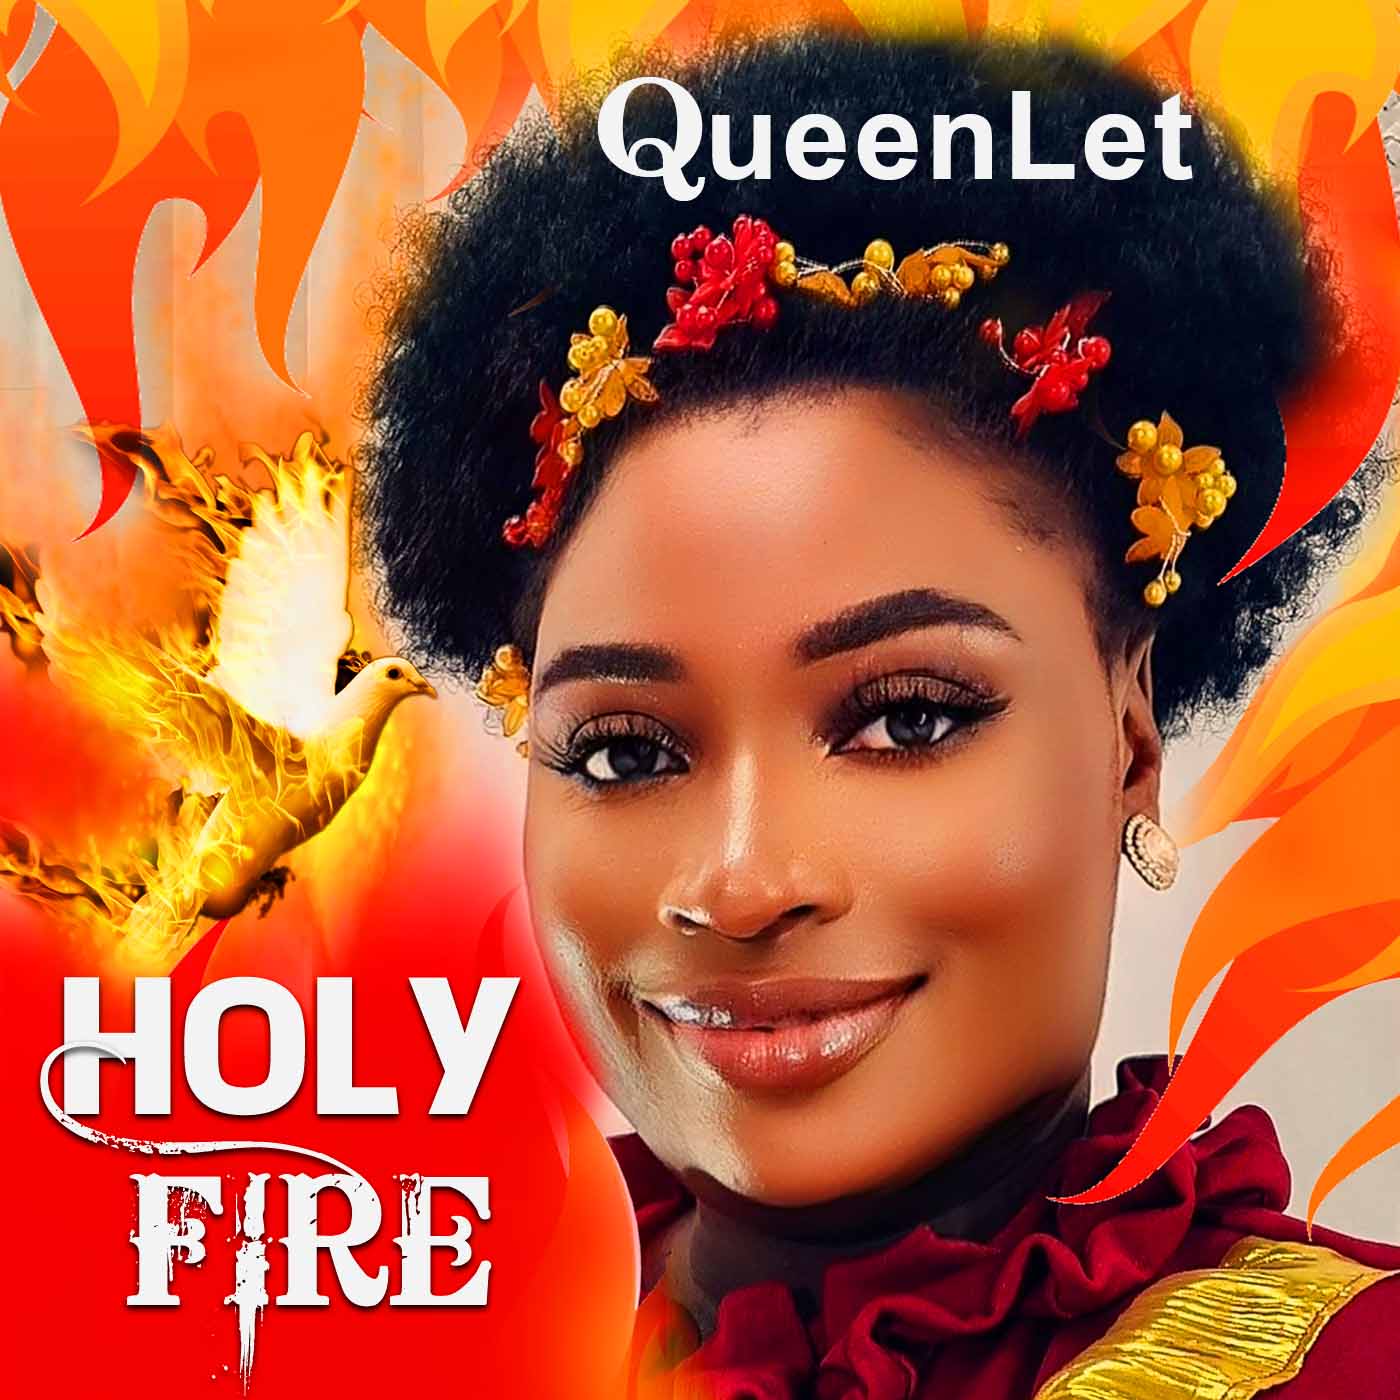 QueenLet dropped Holy Fire